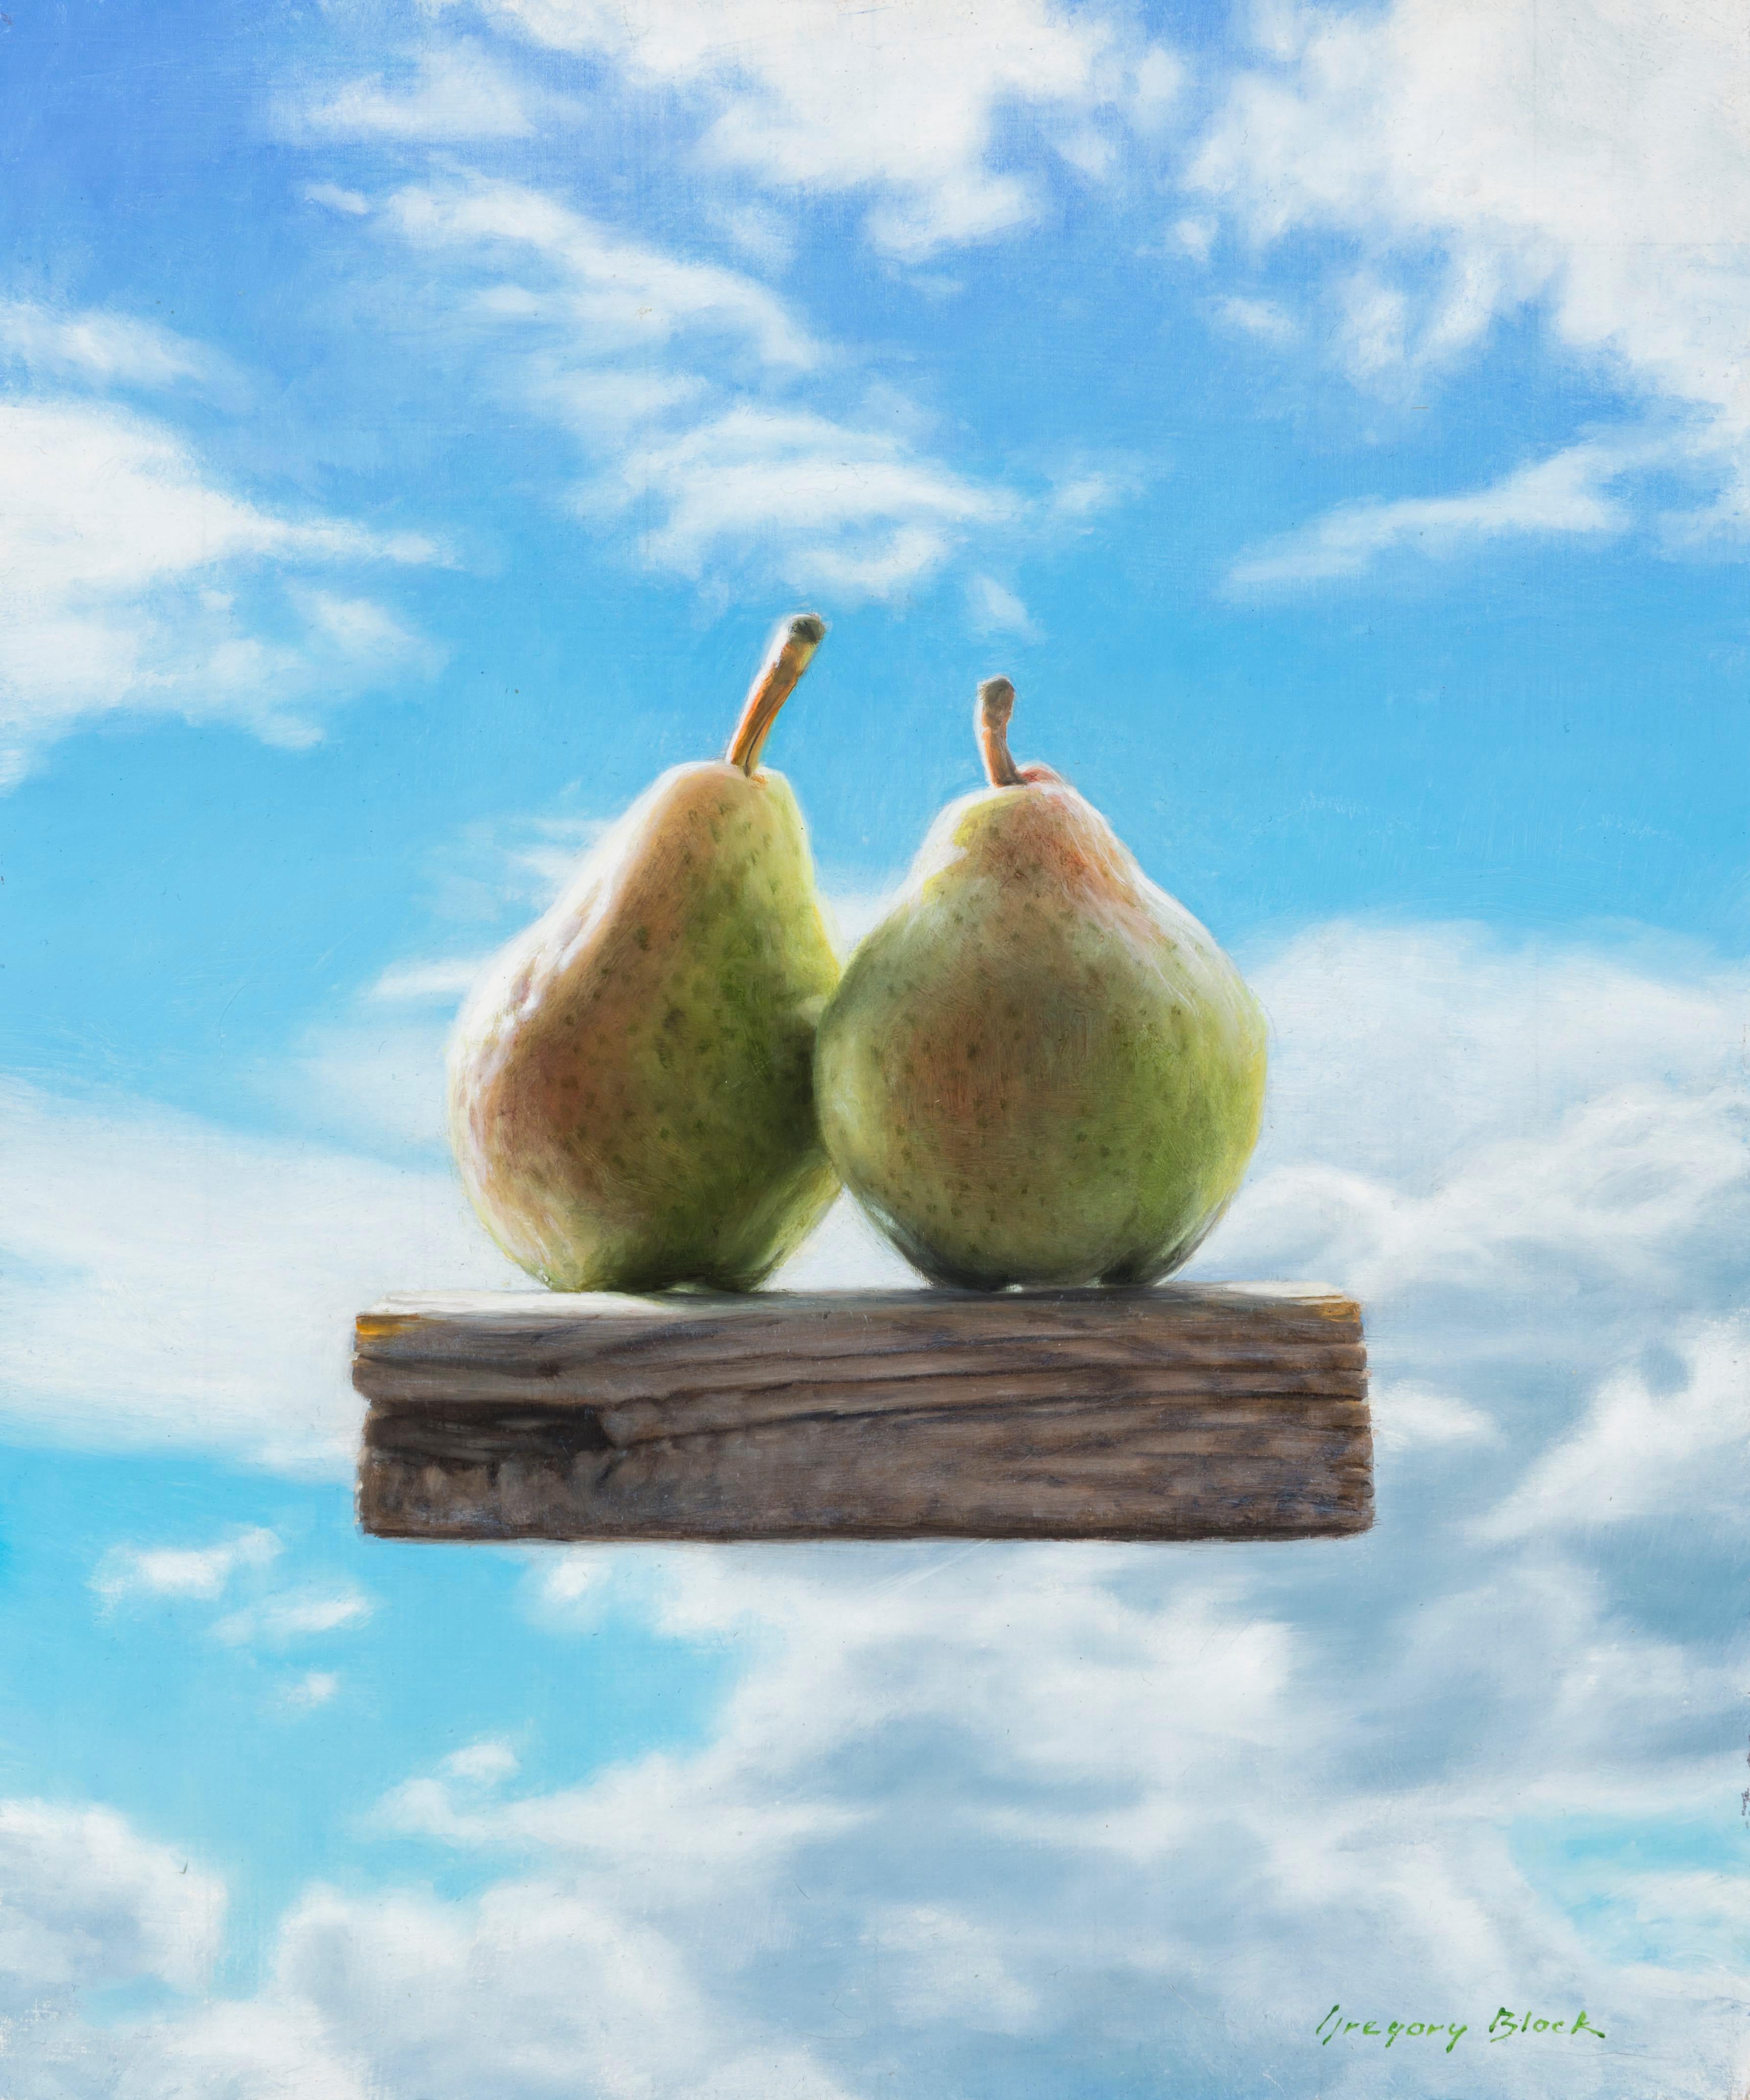 Gregory Block Figurative Painting - "Pears" Oil Painting